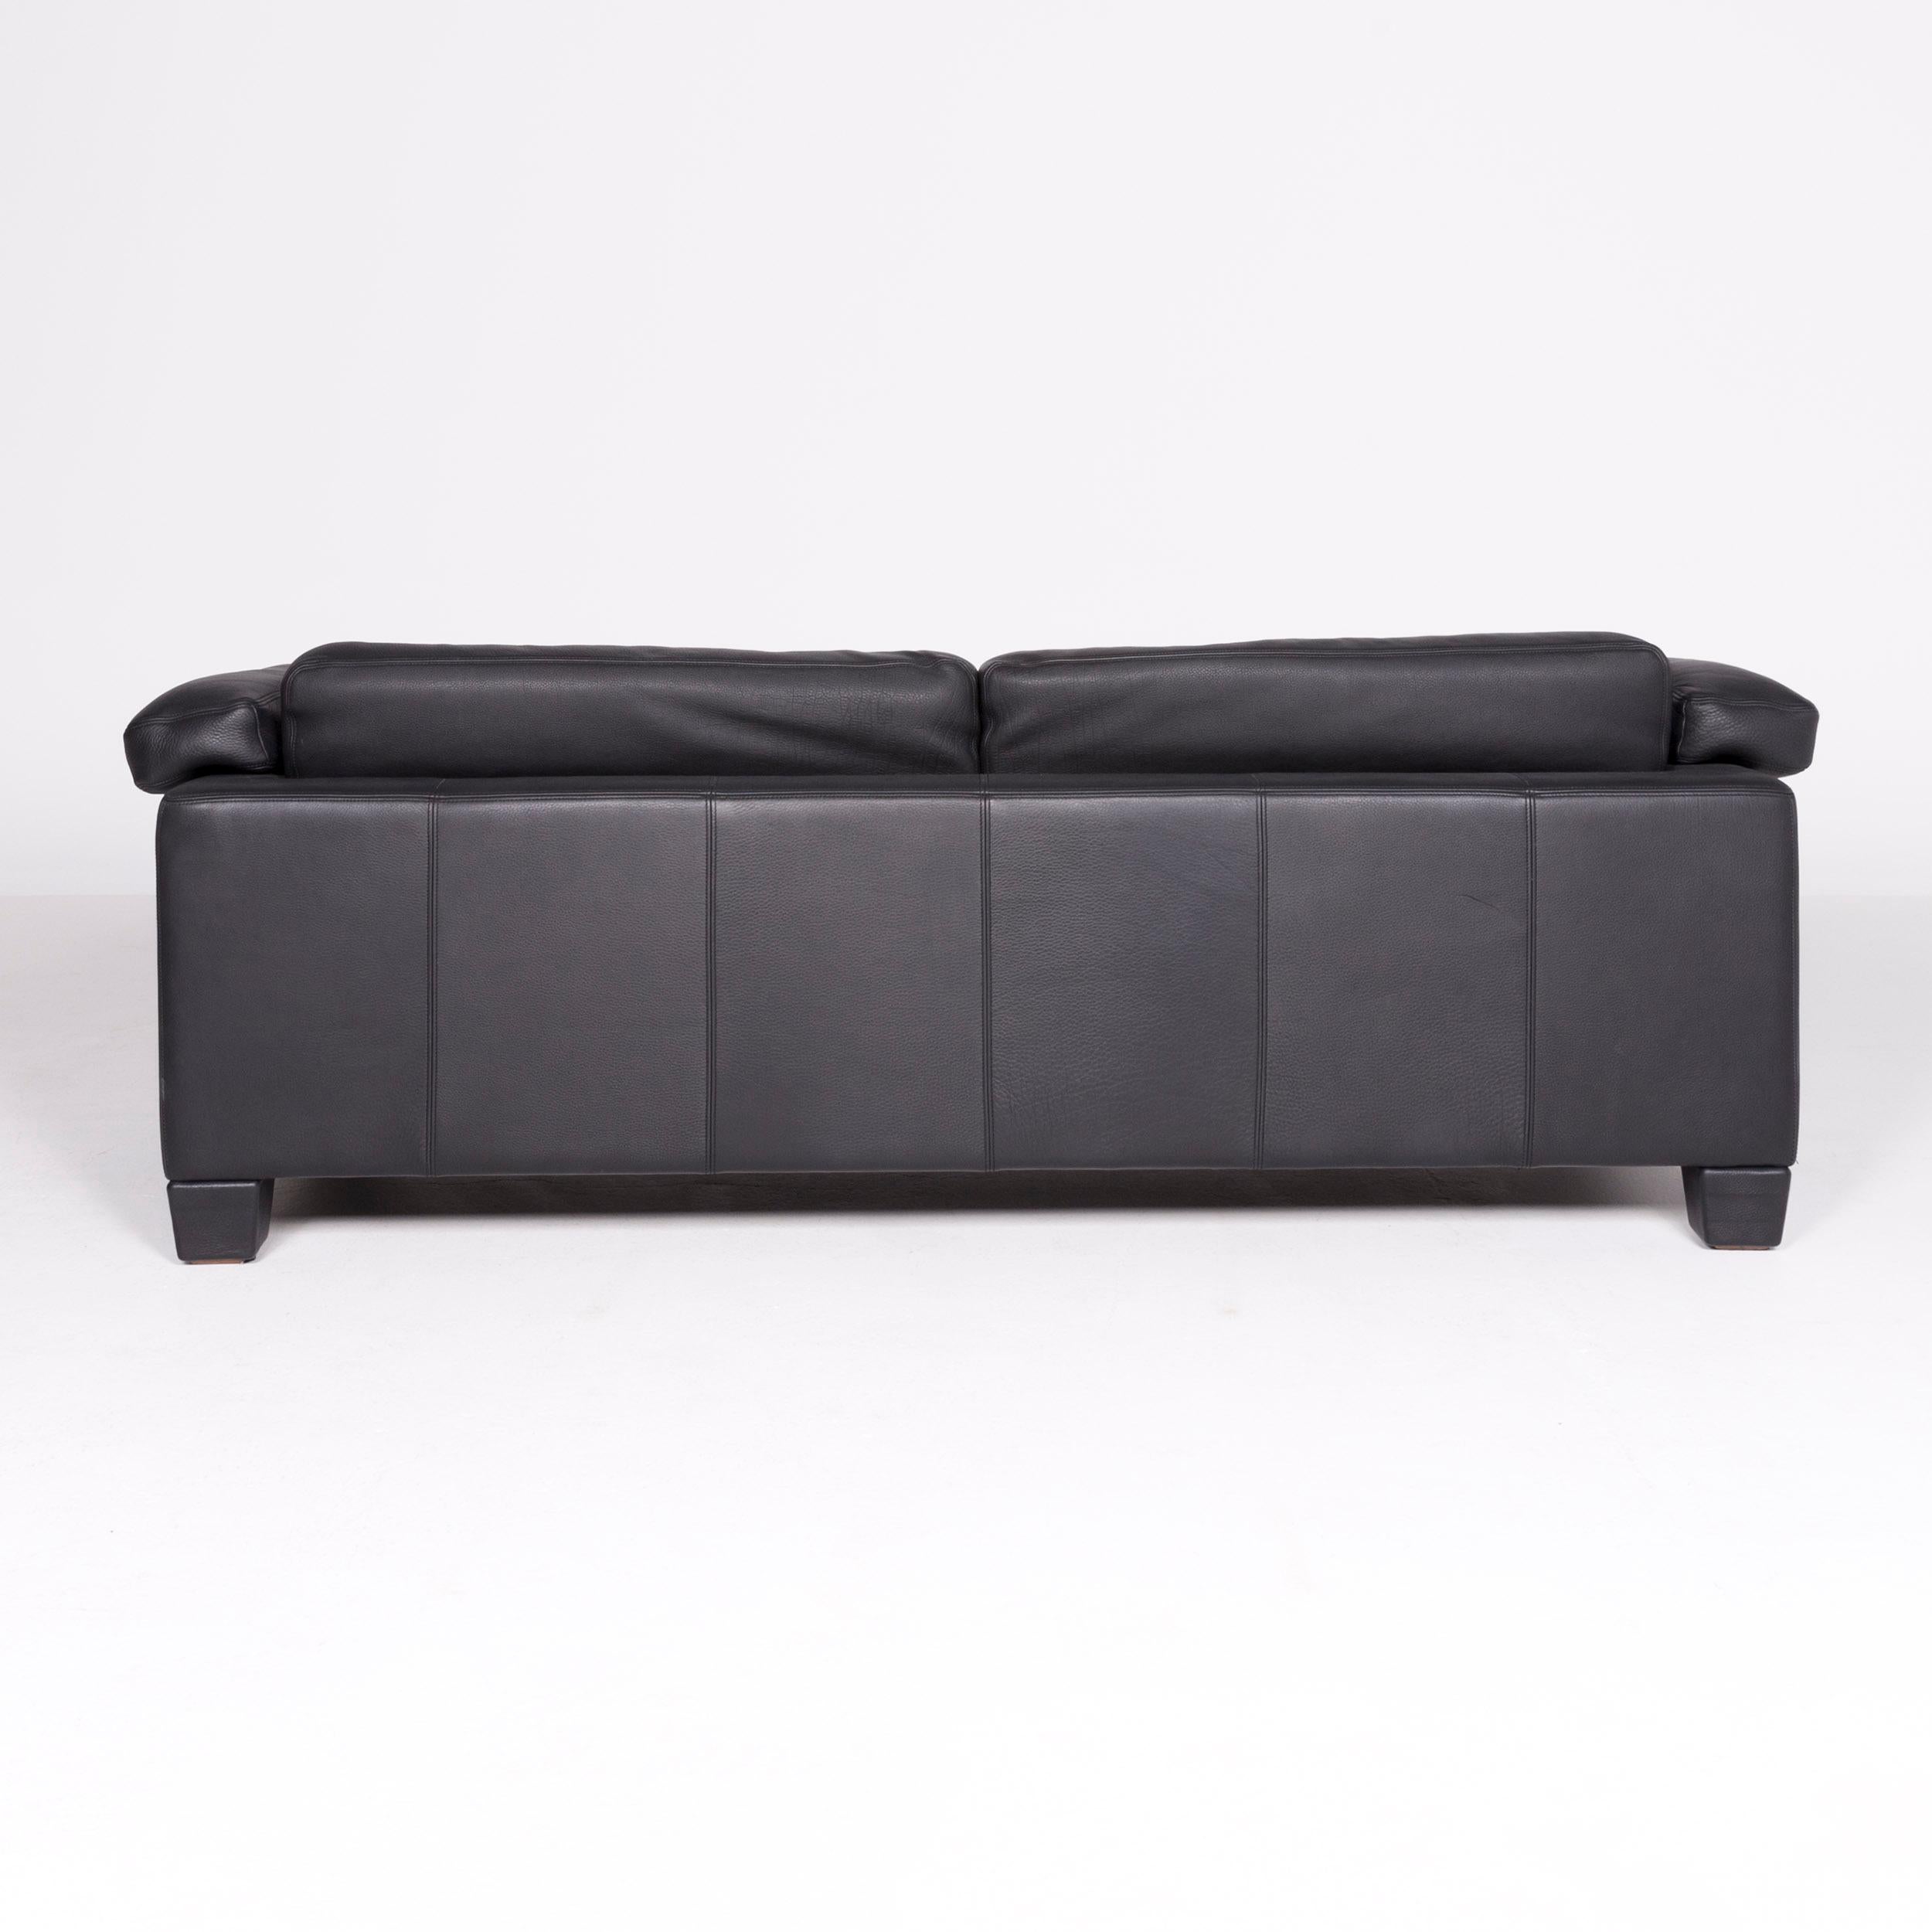 De Sede DS 17 Designer Leather Sofa Black Genuine Leather Two-Seat Couch For Sale 2